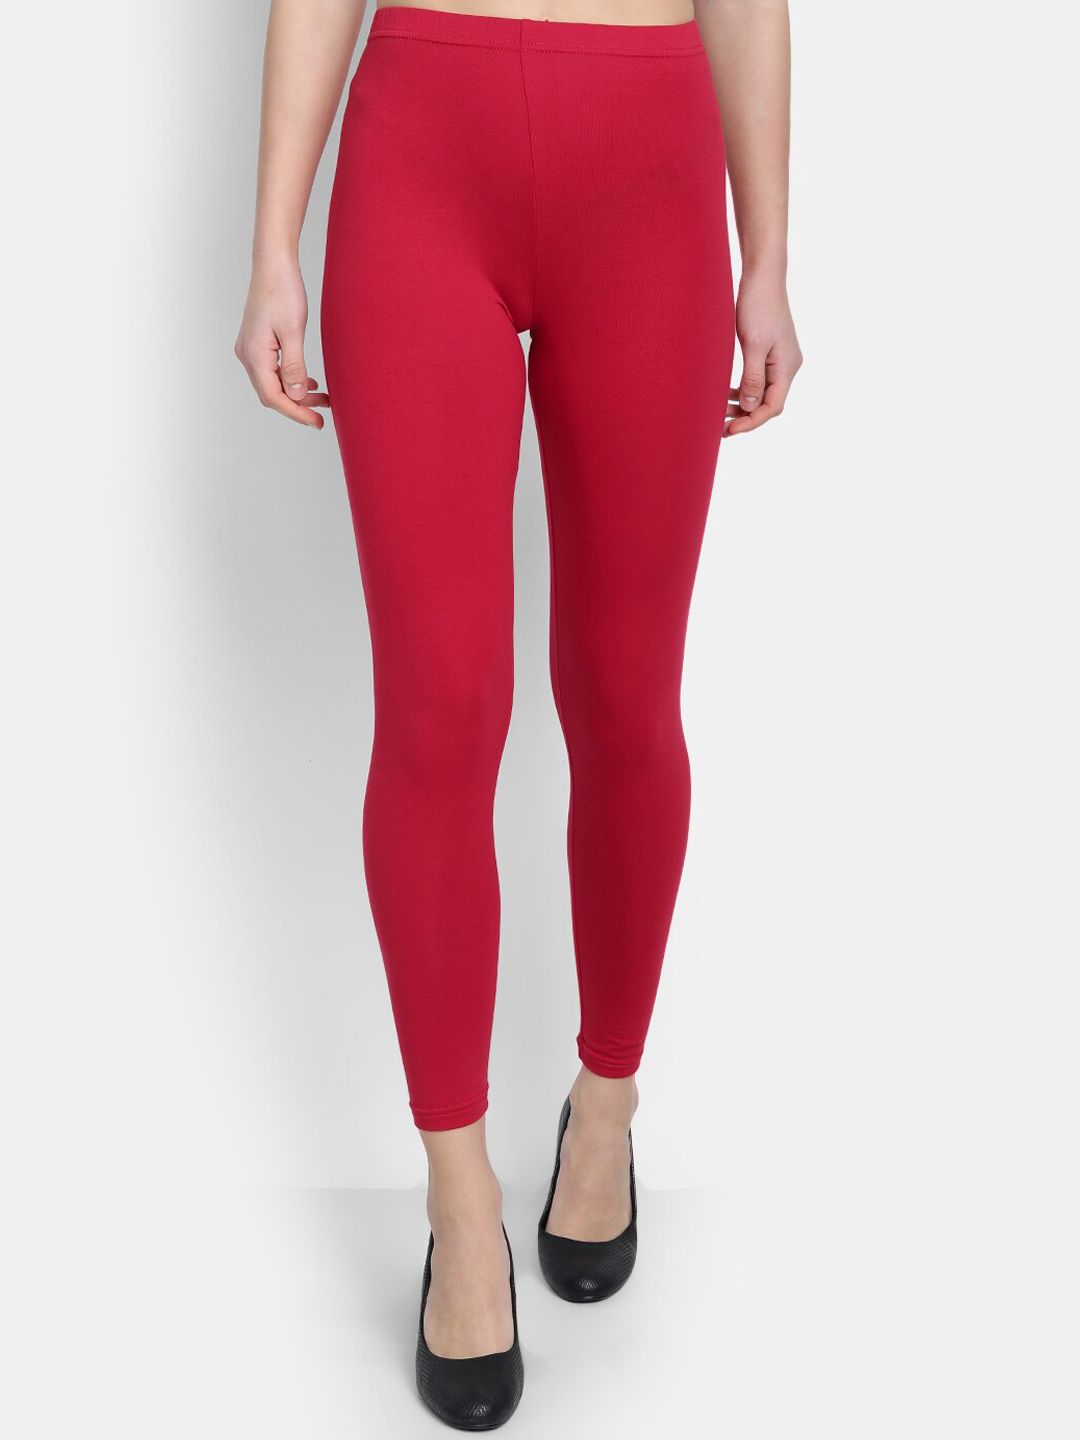 fabGLOBAL Women Red Solid Ankle-Length Leggings Price in India